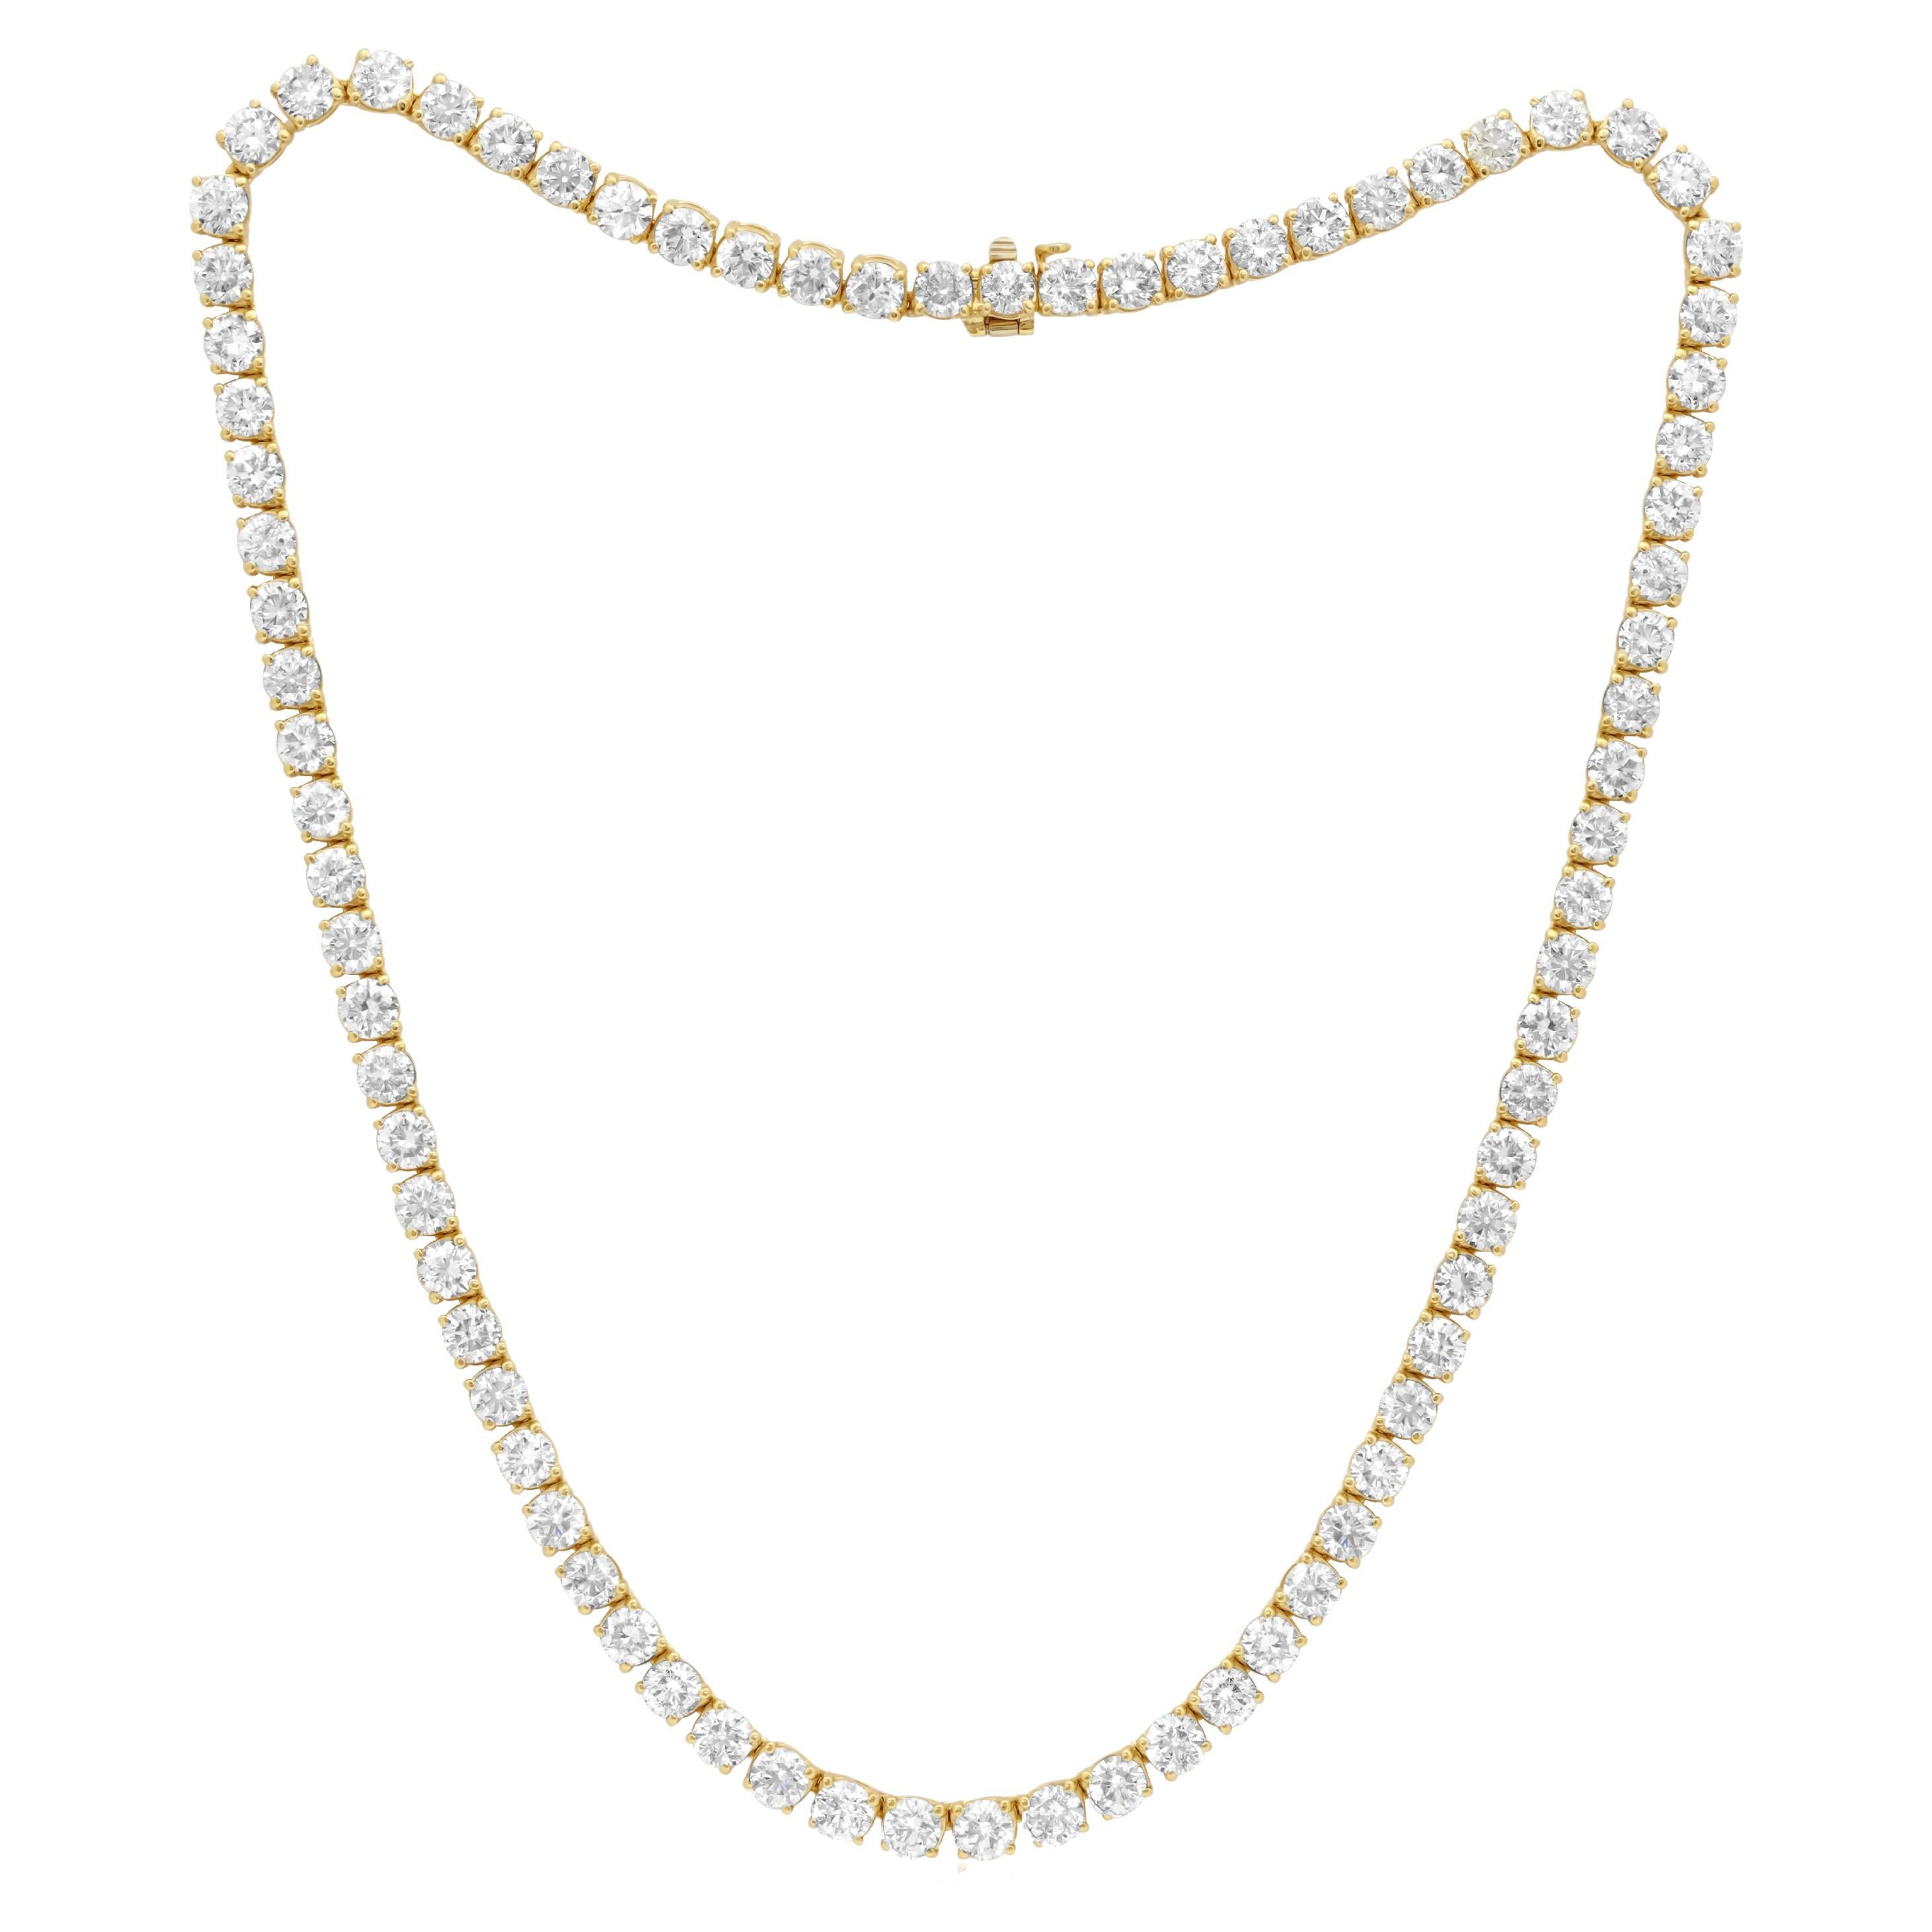 Diana M. Custom 14.05 cts Round 4 Prong Diamond 14k Yellow Gold Tennis Necklace  For Sale